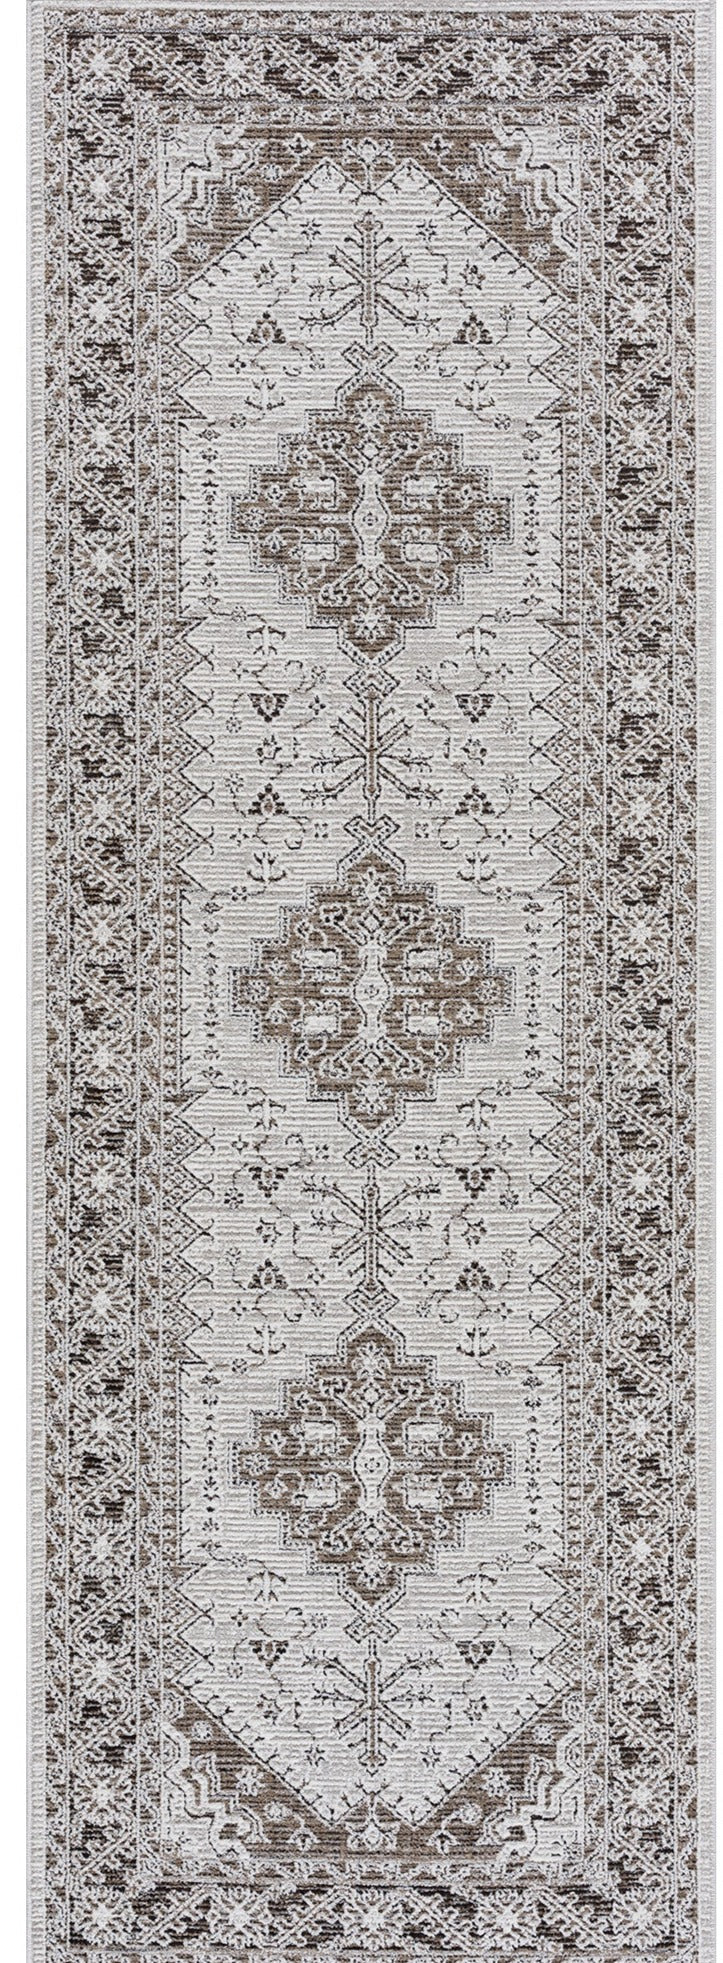 United Weavers Paramount Eagerness 2660-50350 Brown Rug